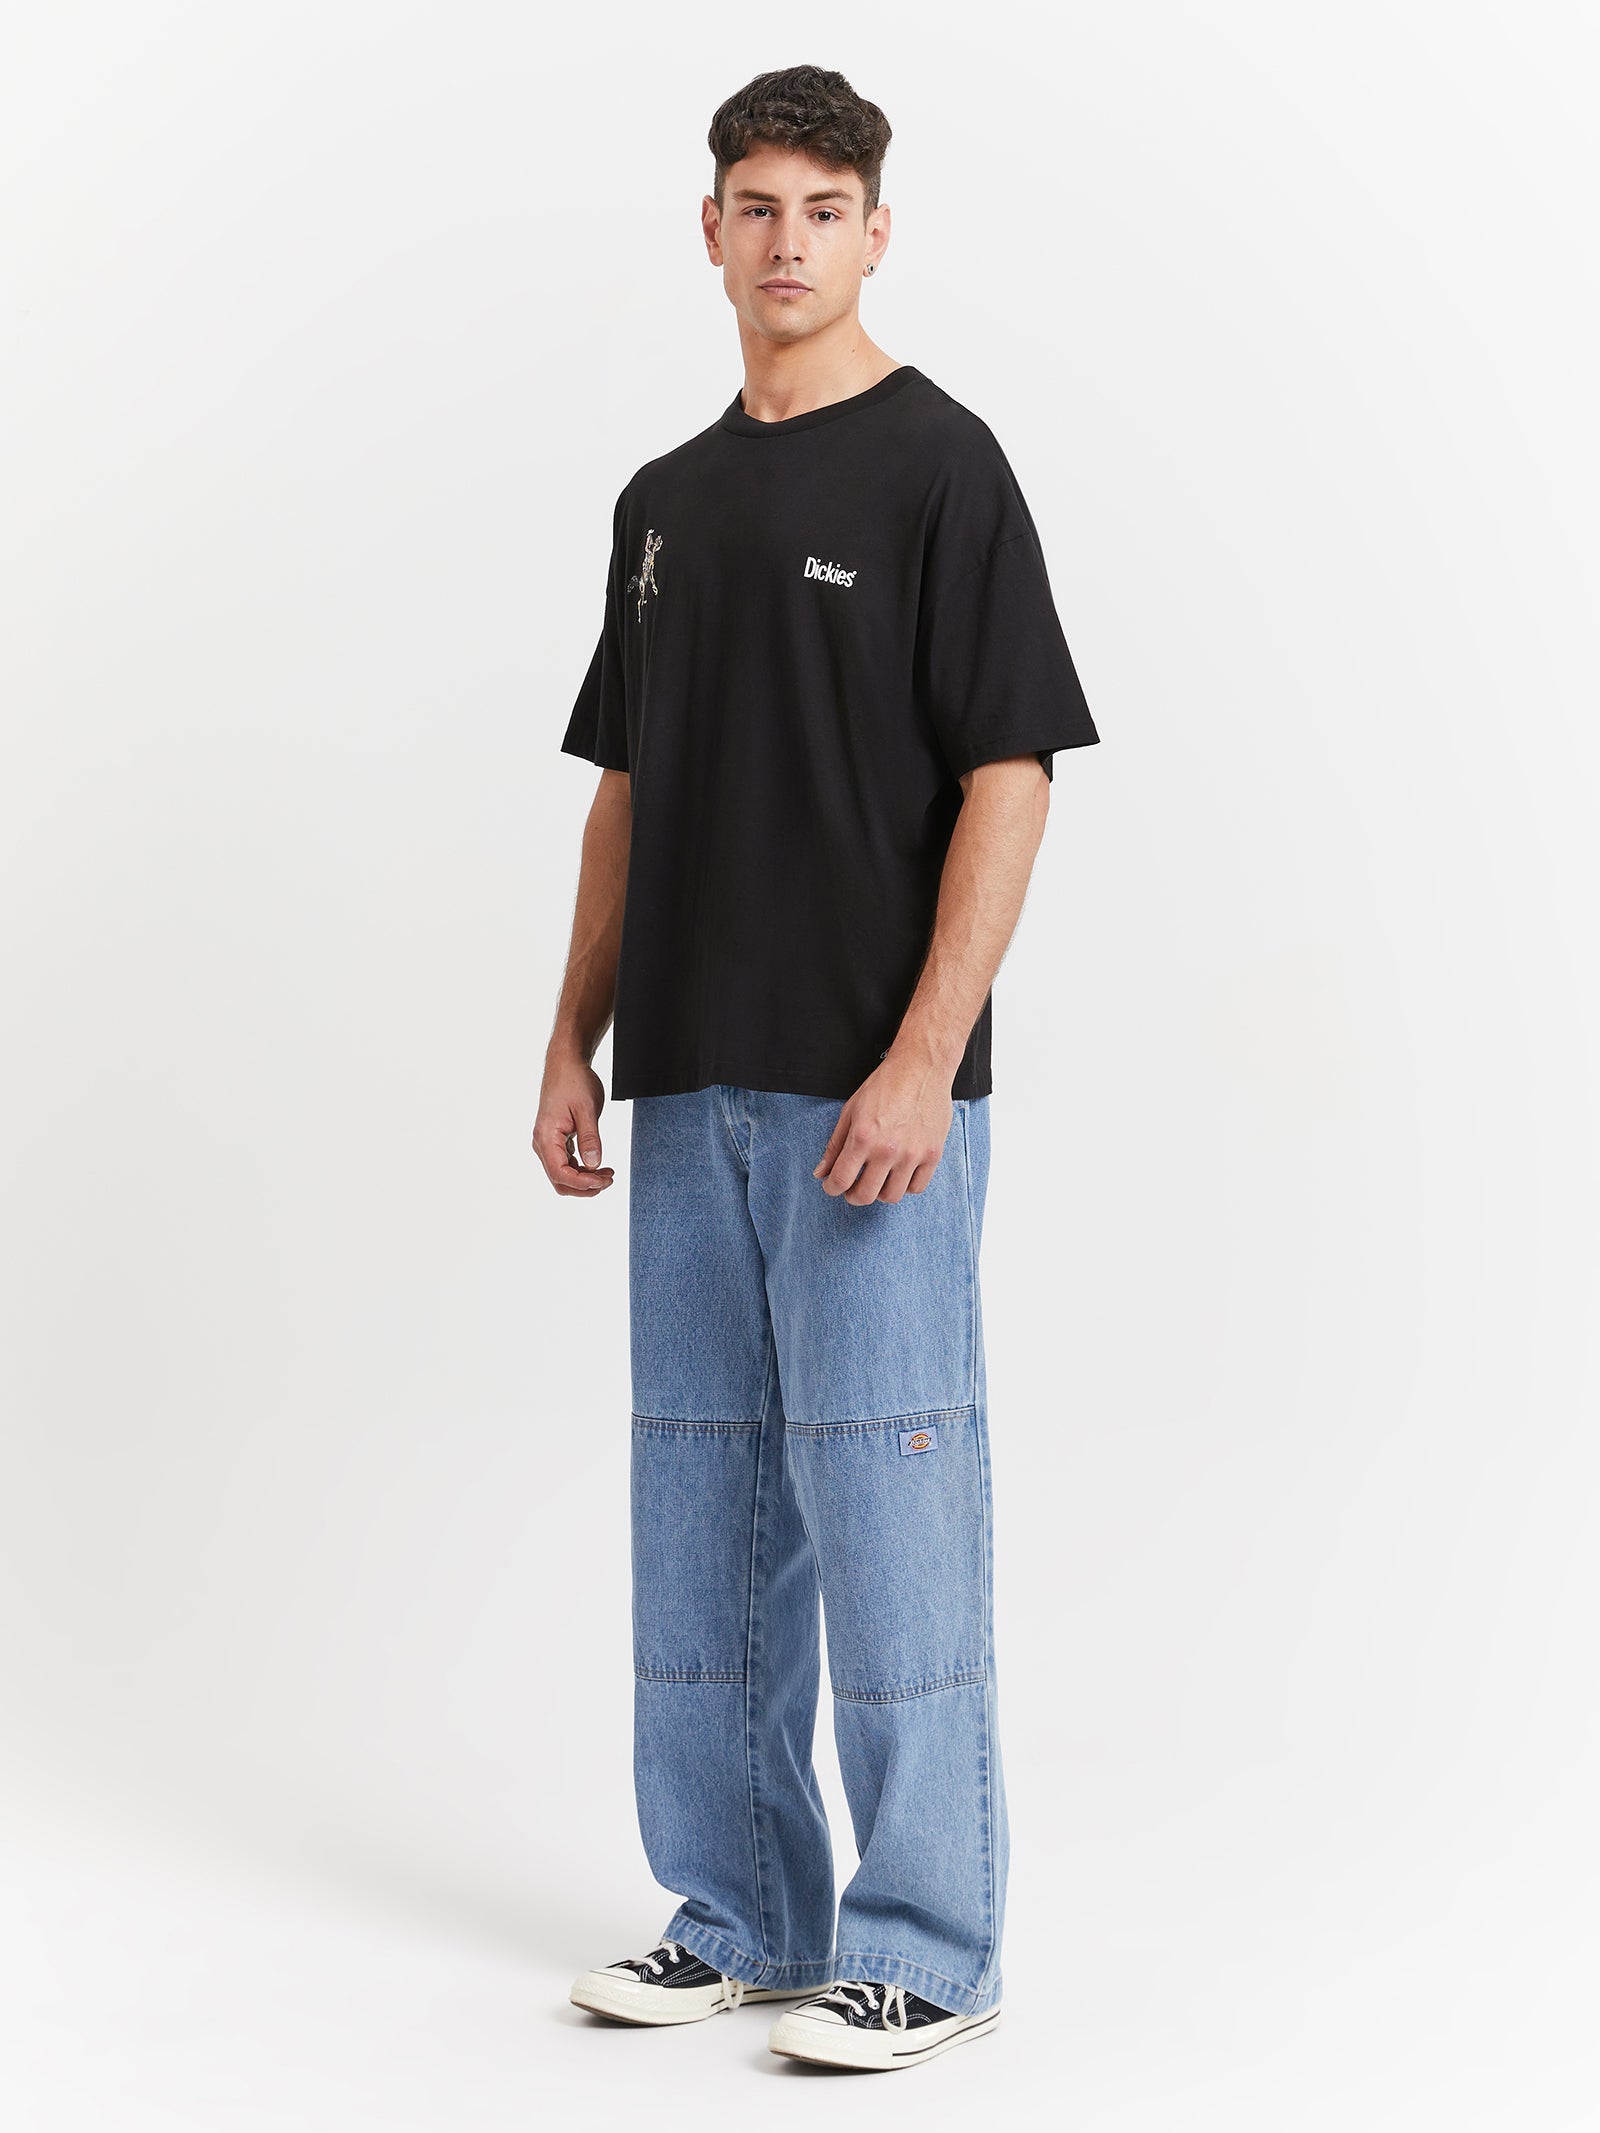 Oversized Box Fit T-Shirt in Black - Glue Store